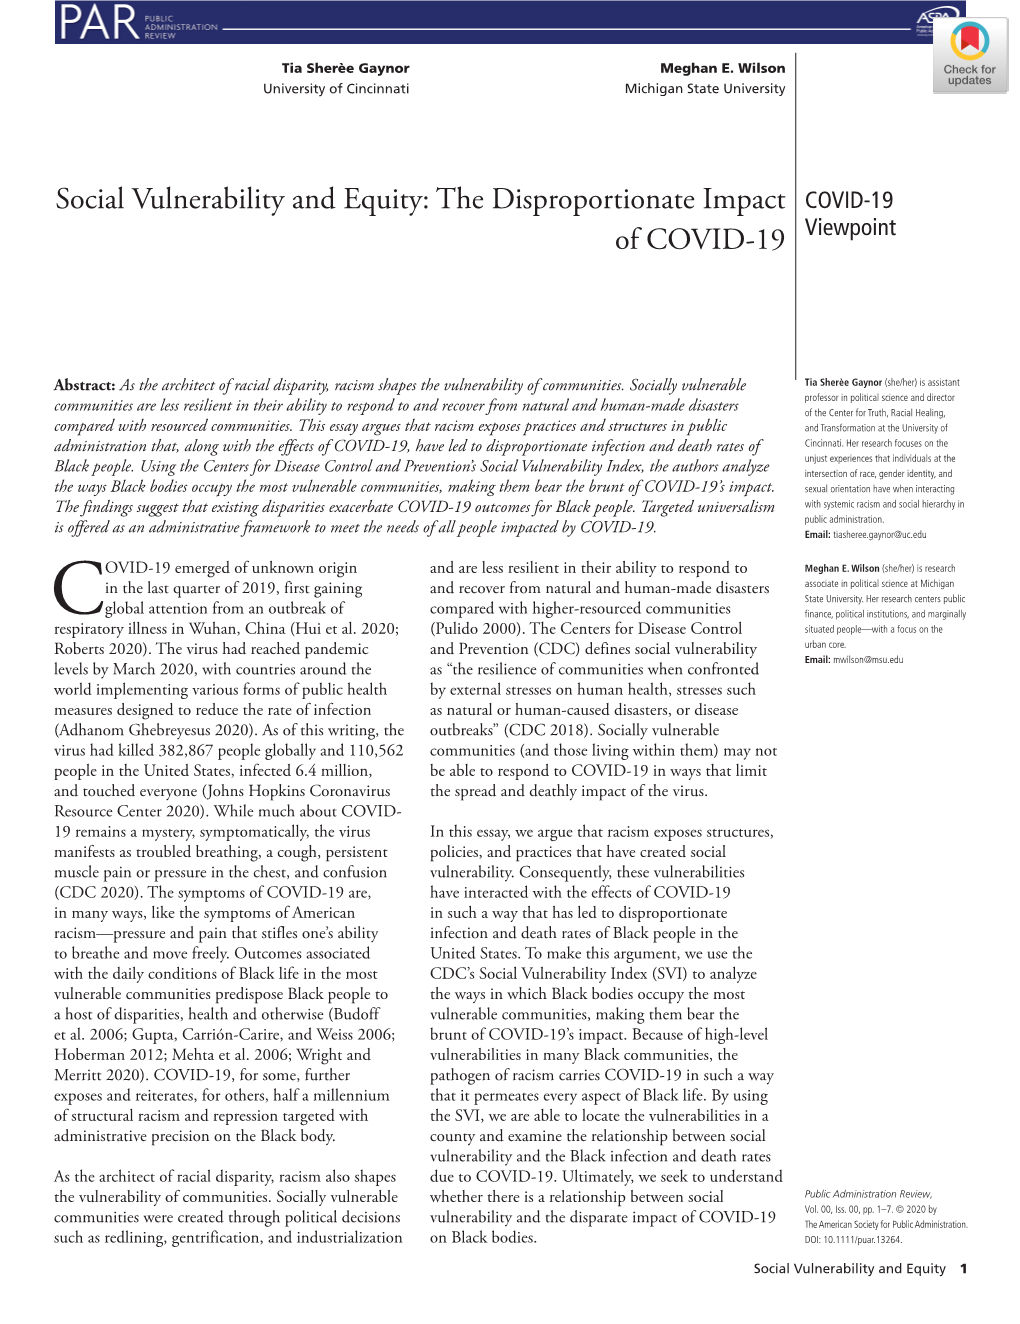 Social Vulnerability and Equity: the Disproportionate Impact of COVID‐19